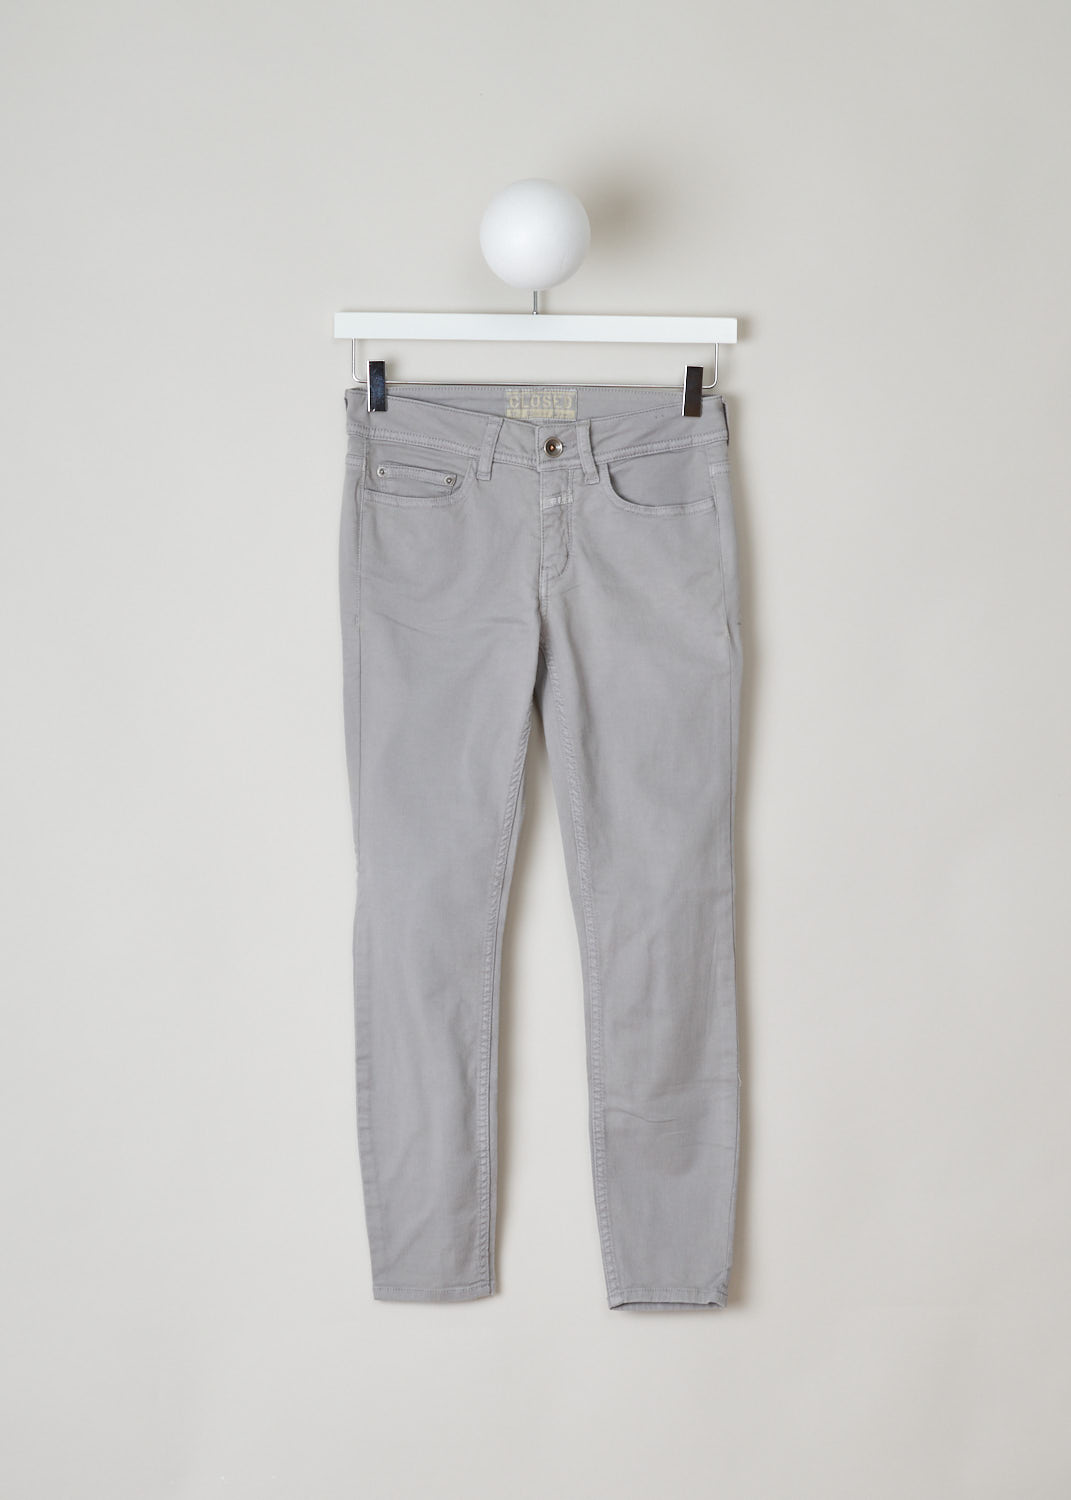 Closed, Grey colored jeans, baker_C91833_07N_3L_124, grey, front, Mid-waist slim-fit jeans made with cropped length, to show off any shoe you are wearing. Comes with the traditional 5 pockets and as you fastening option you get a zipper and button on the front. 